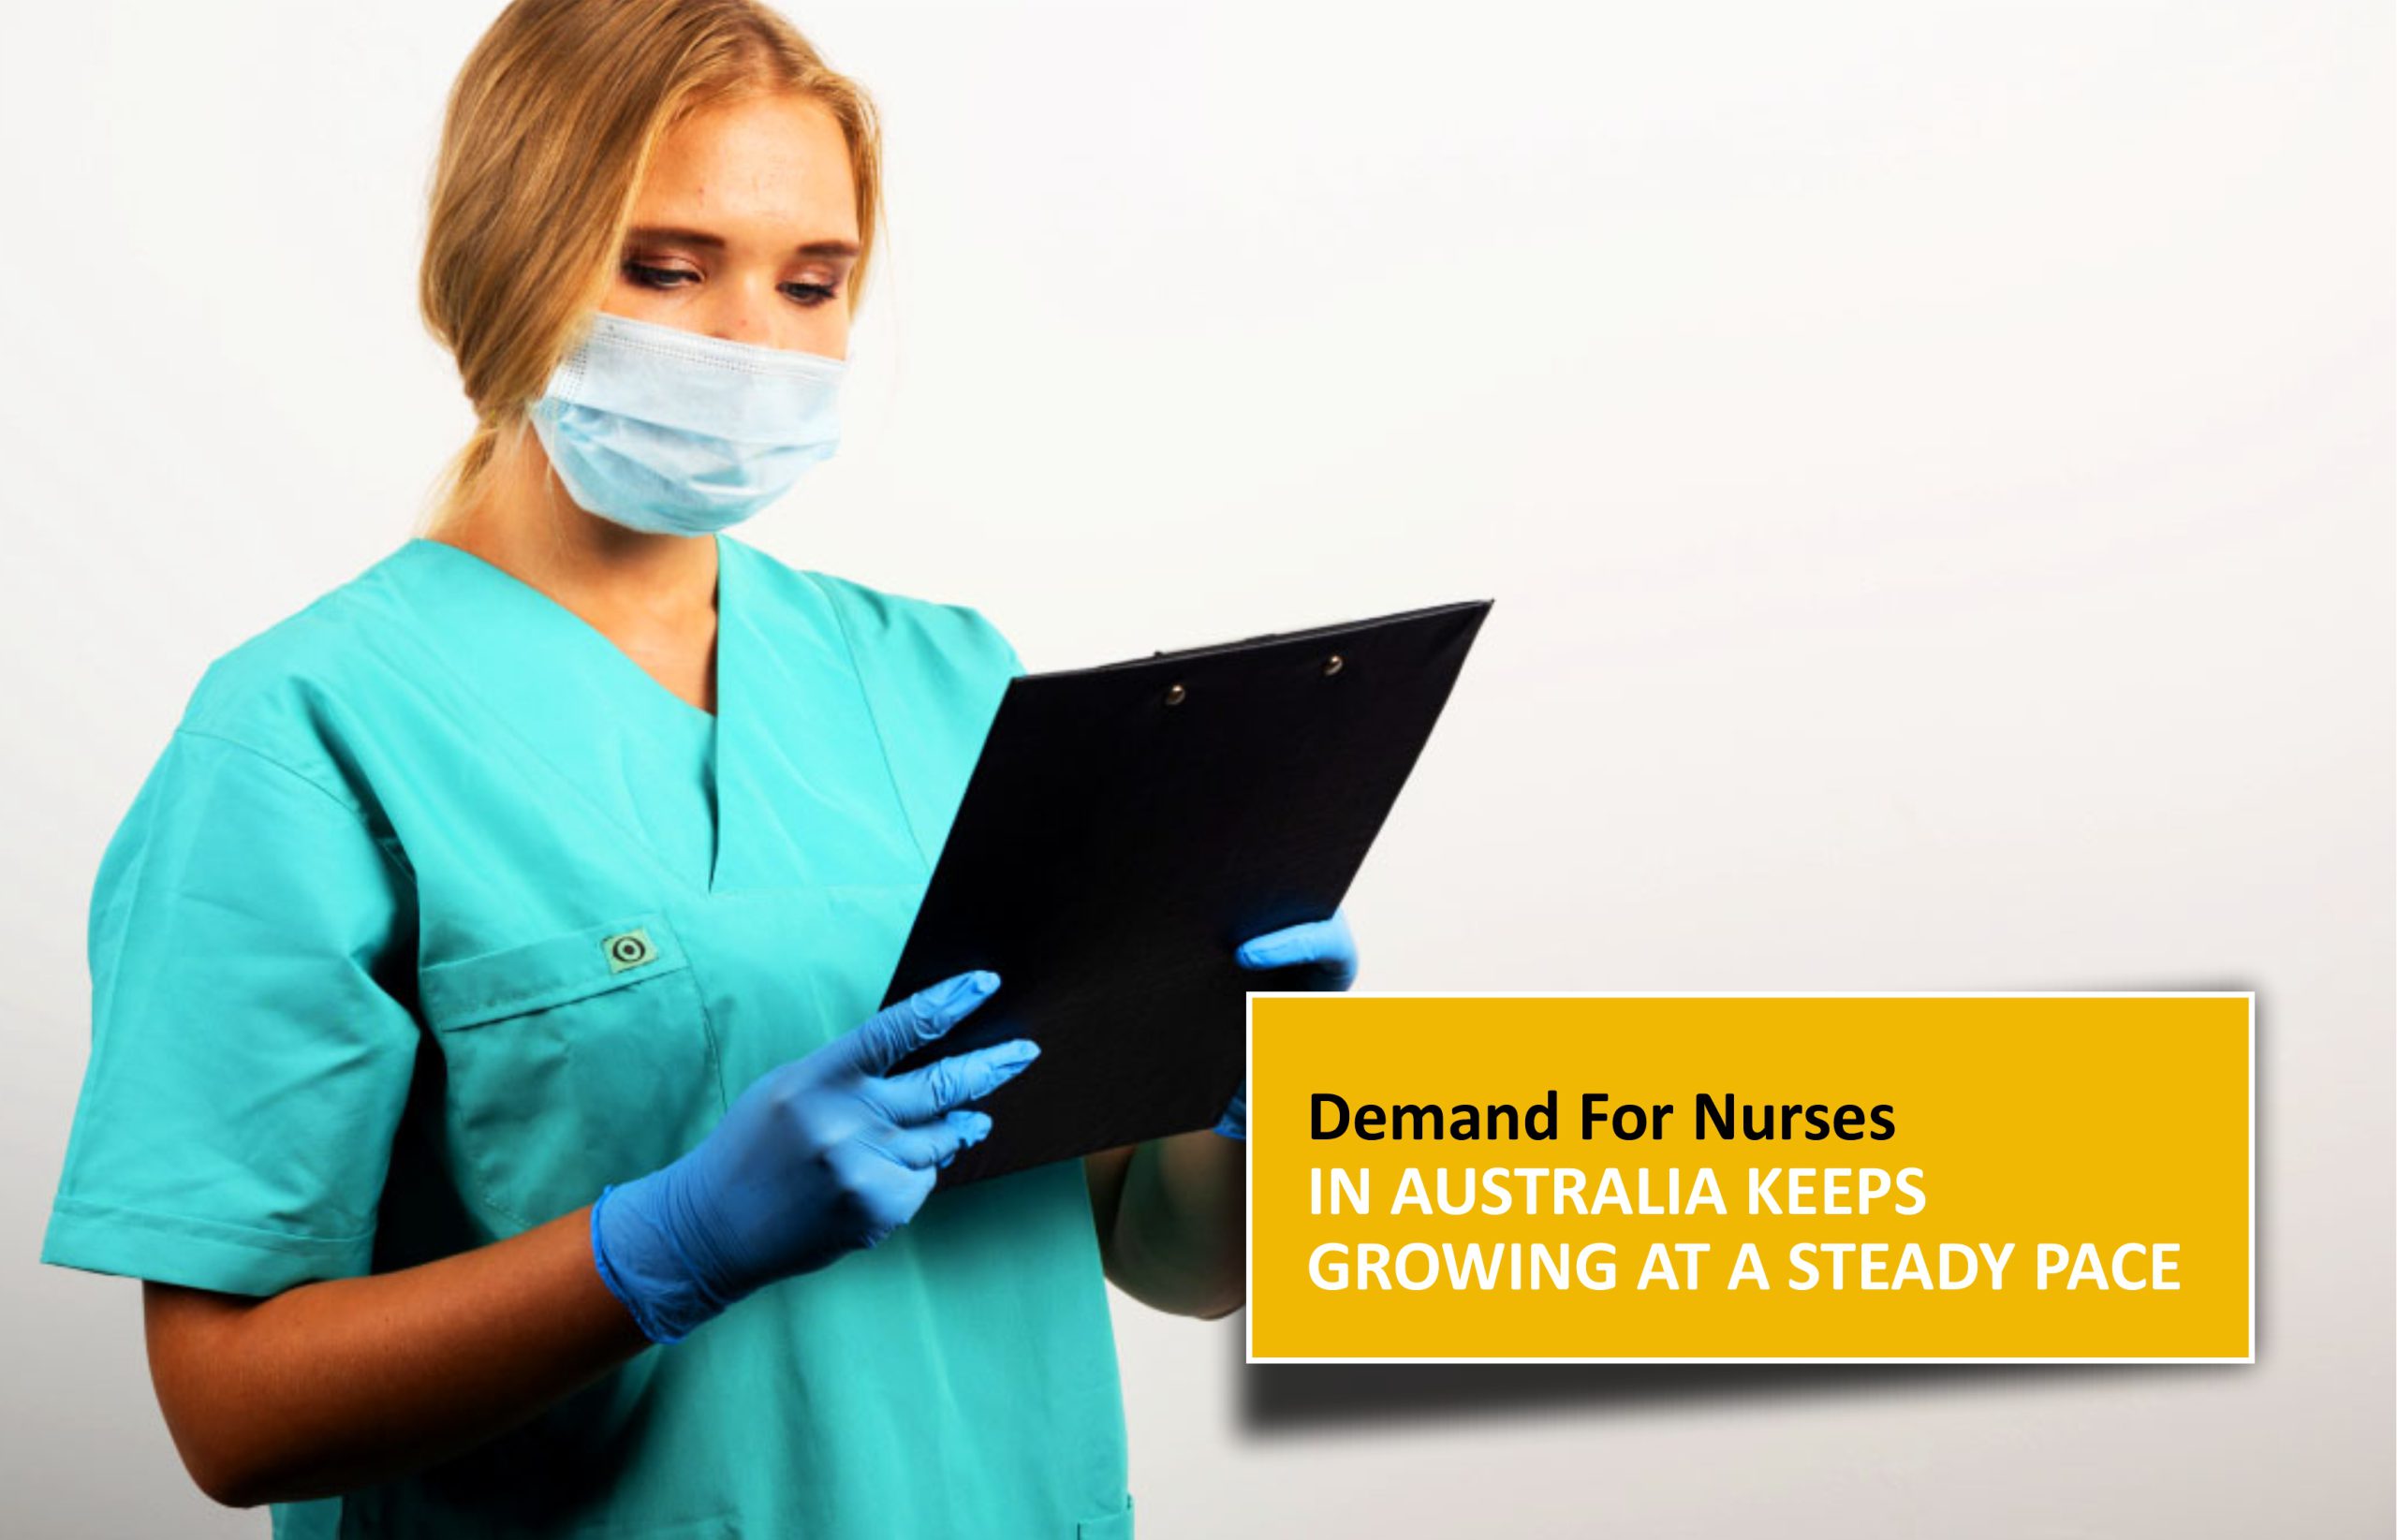 Demand for Nurses in Australia Keeps Growing at a Steady Pace